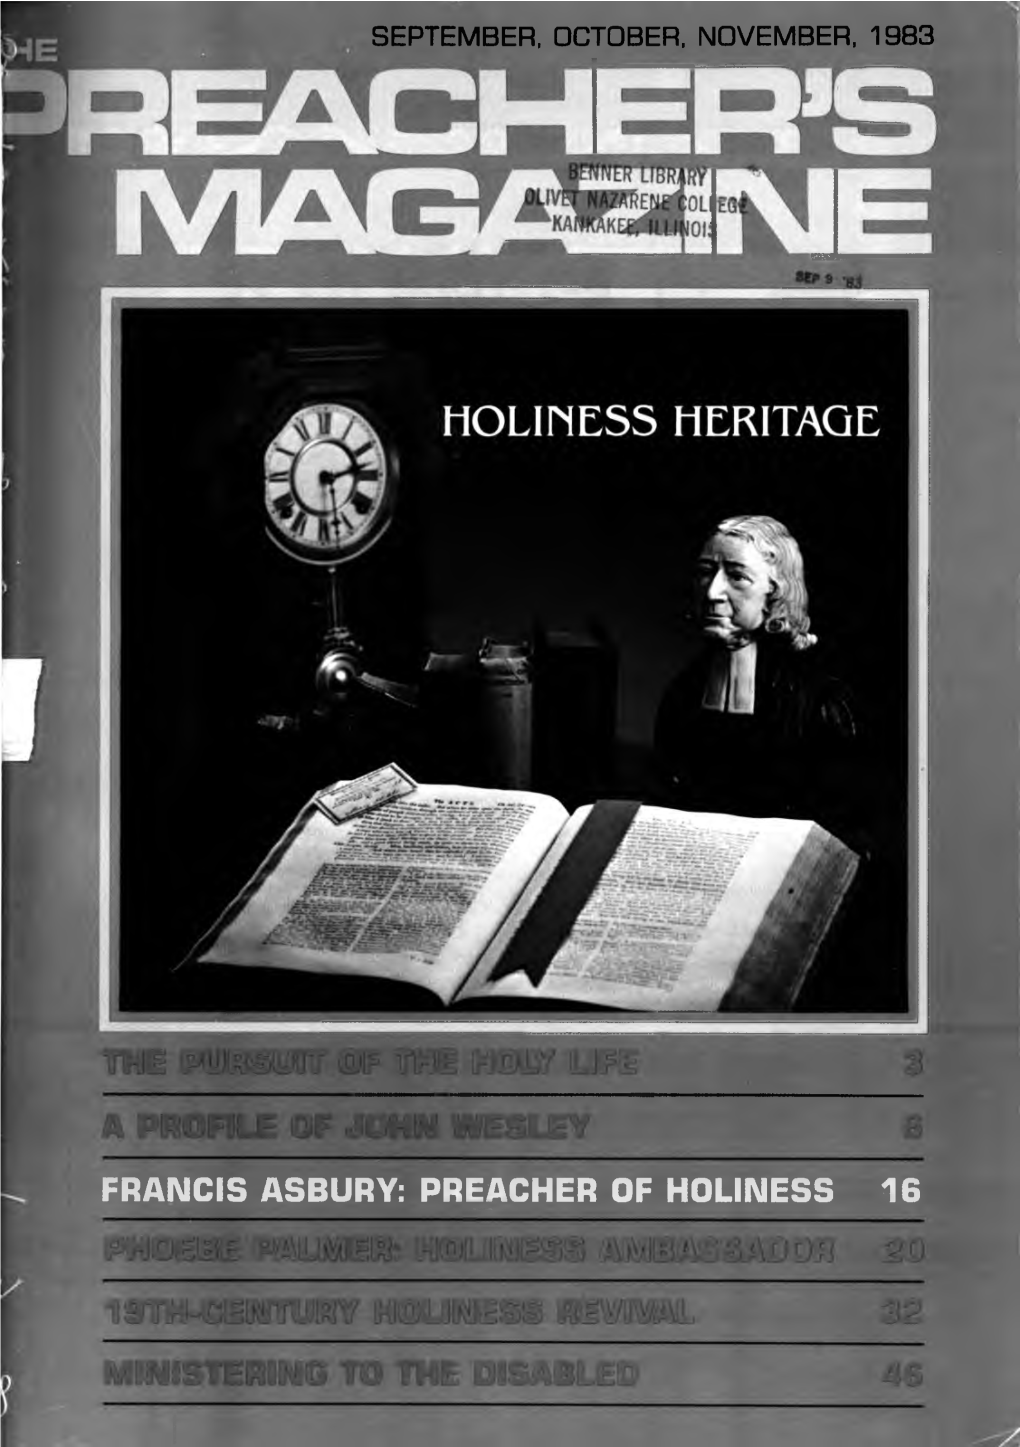 FRANCIS ASBURY: PREACHER of HOLINESS 16 Too Many Today Have Substituted an Office for the Study